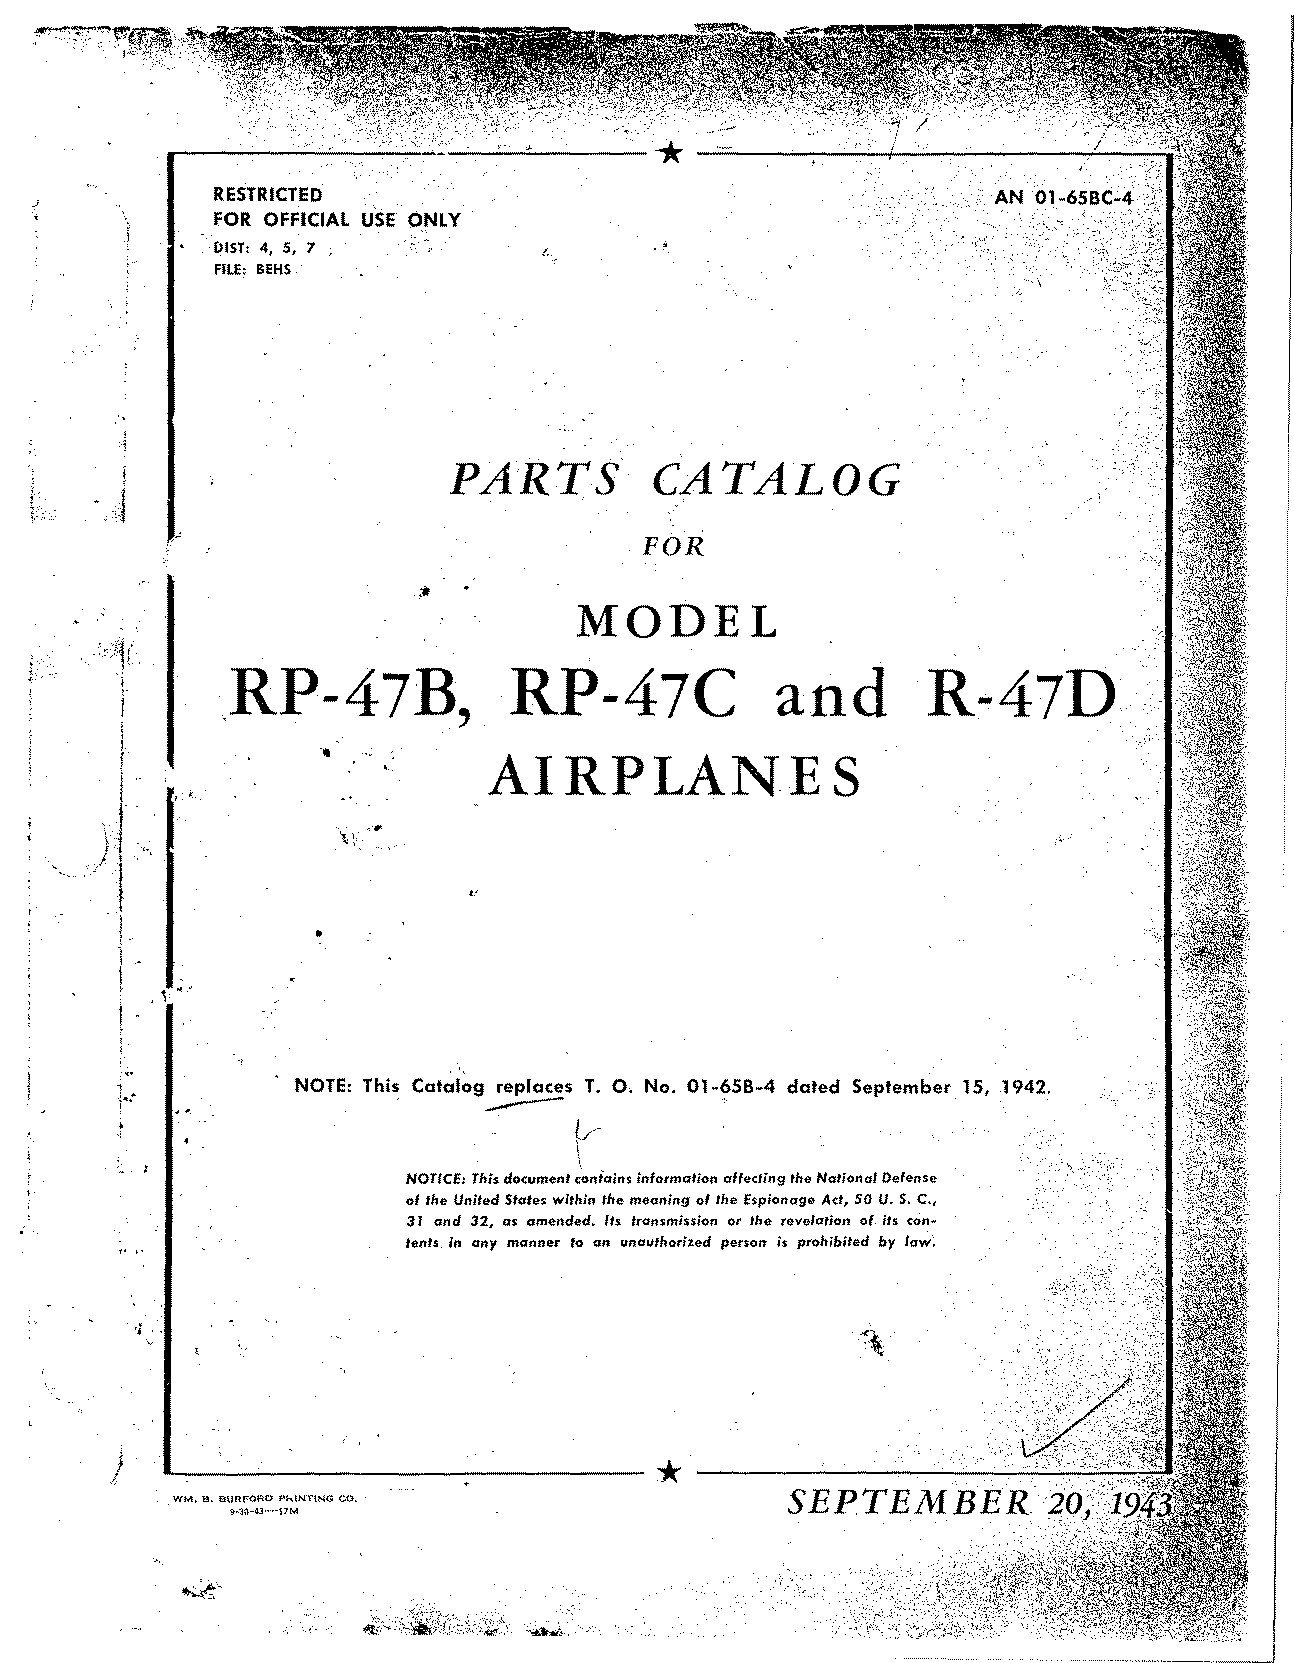 Sample page 1 from AirCorps Library document: Parts Catalog - P-47B, P-47C, P-47D